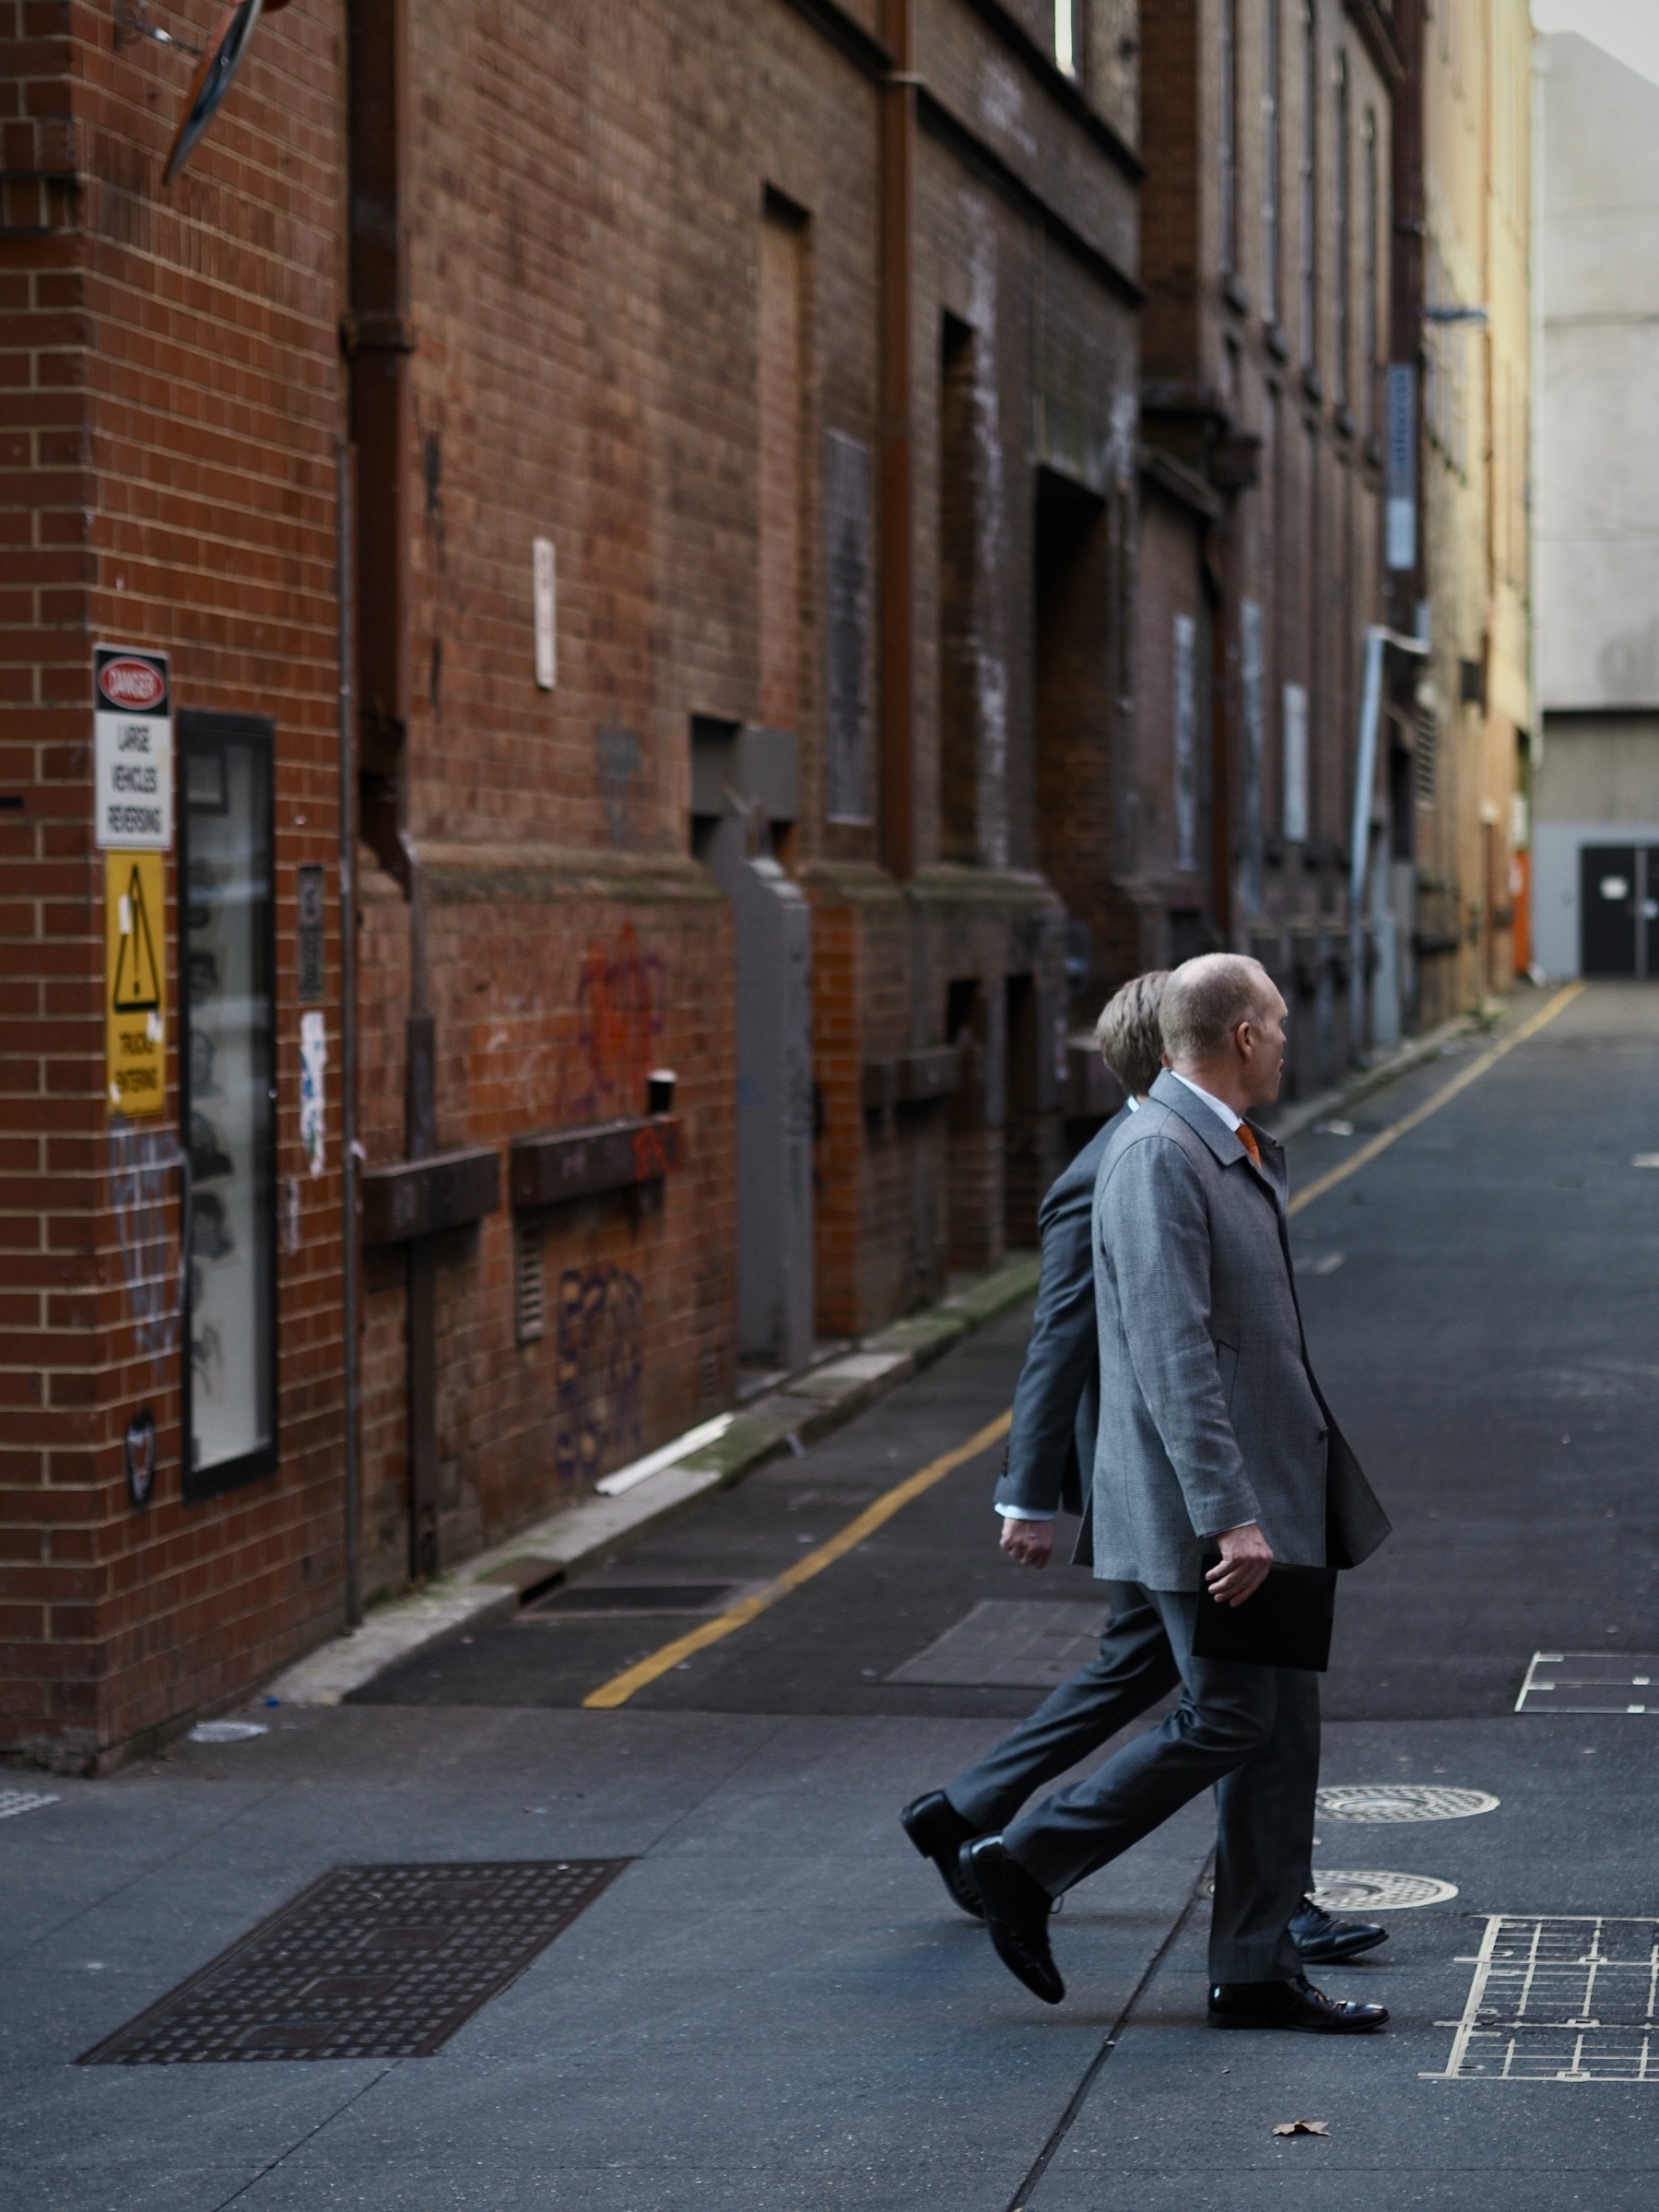 Two men in suits walk in sync past an alleyway.